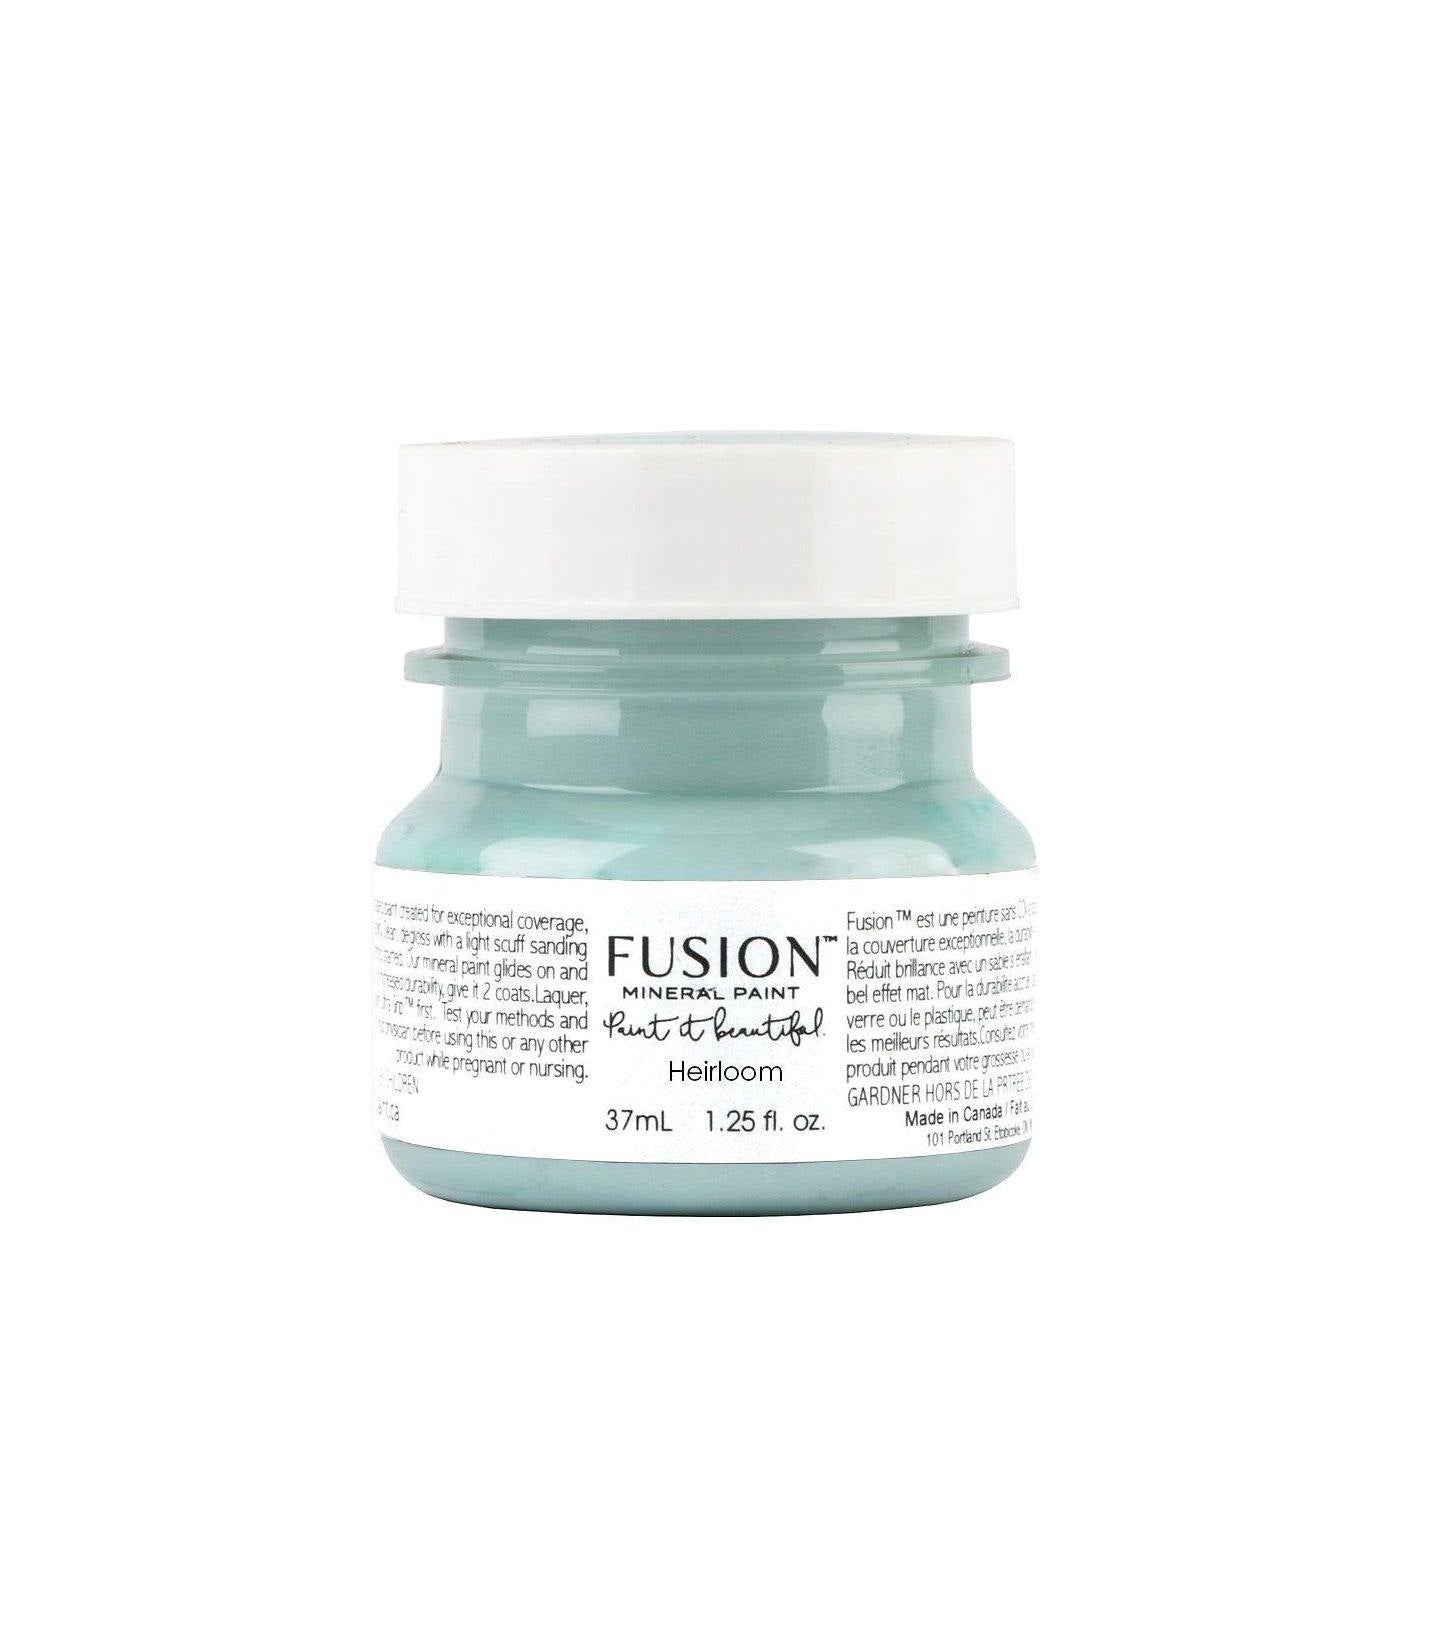 Fusion Mineral Paint Heirloom Tester